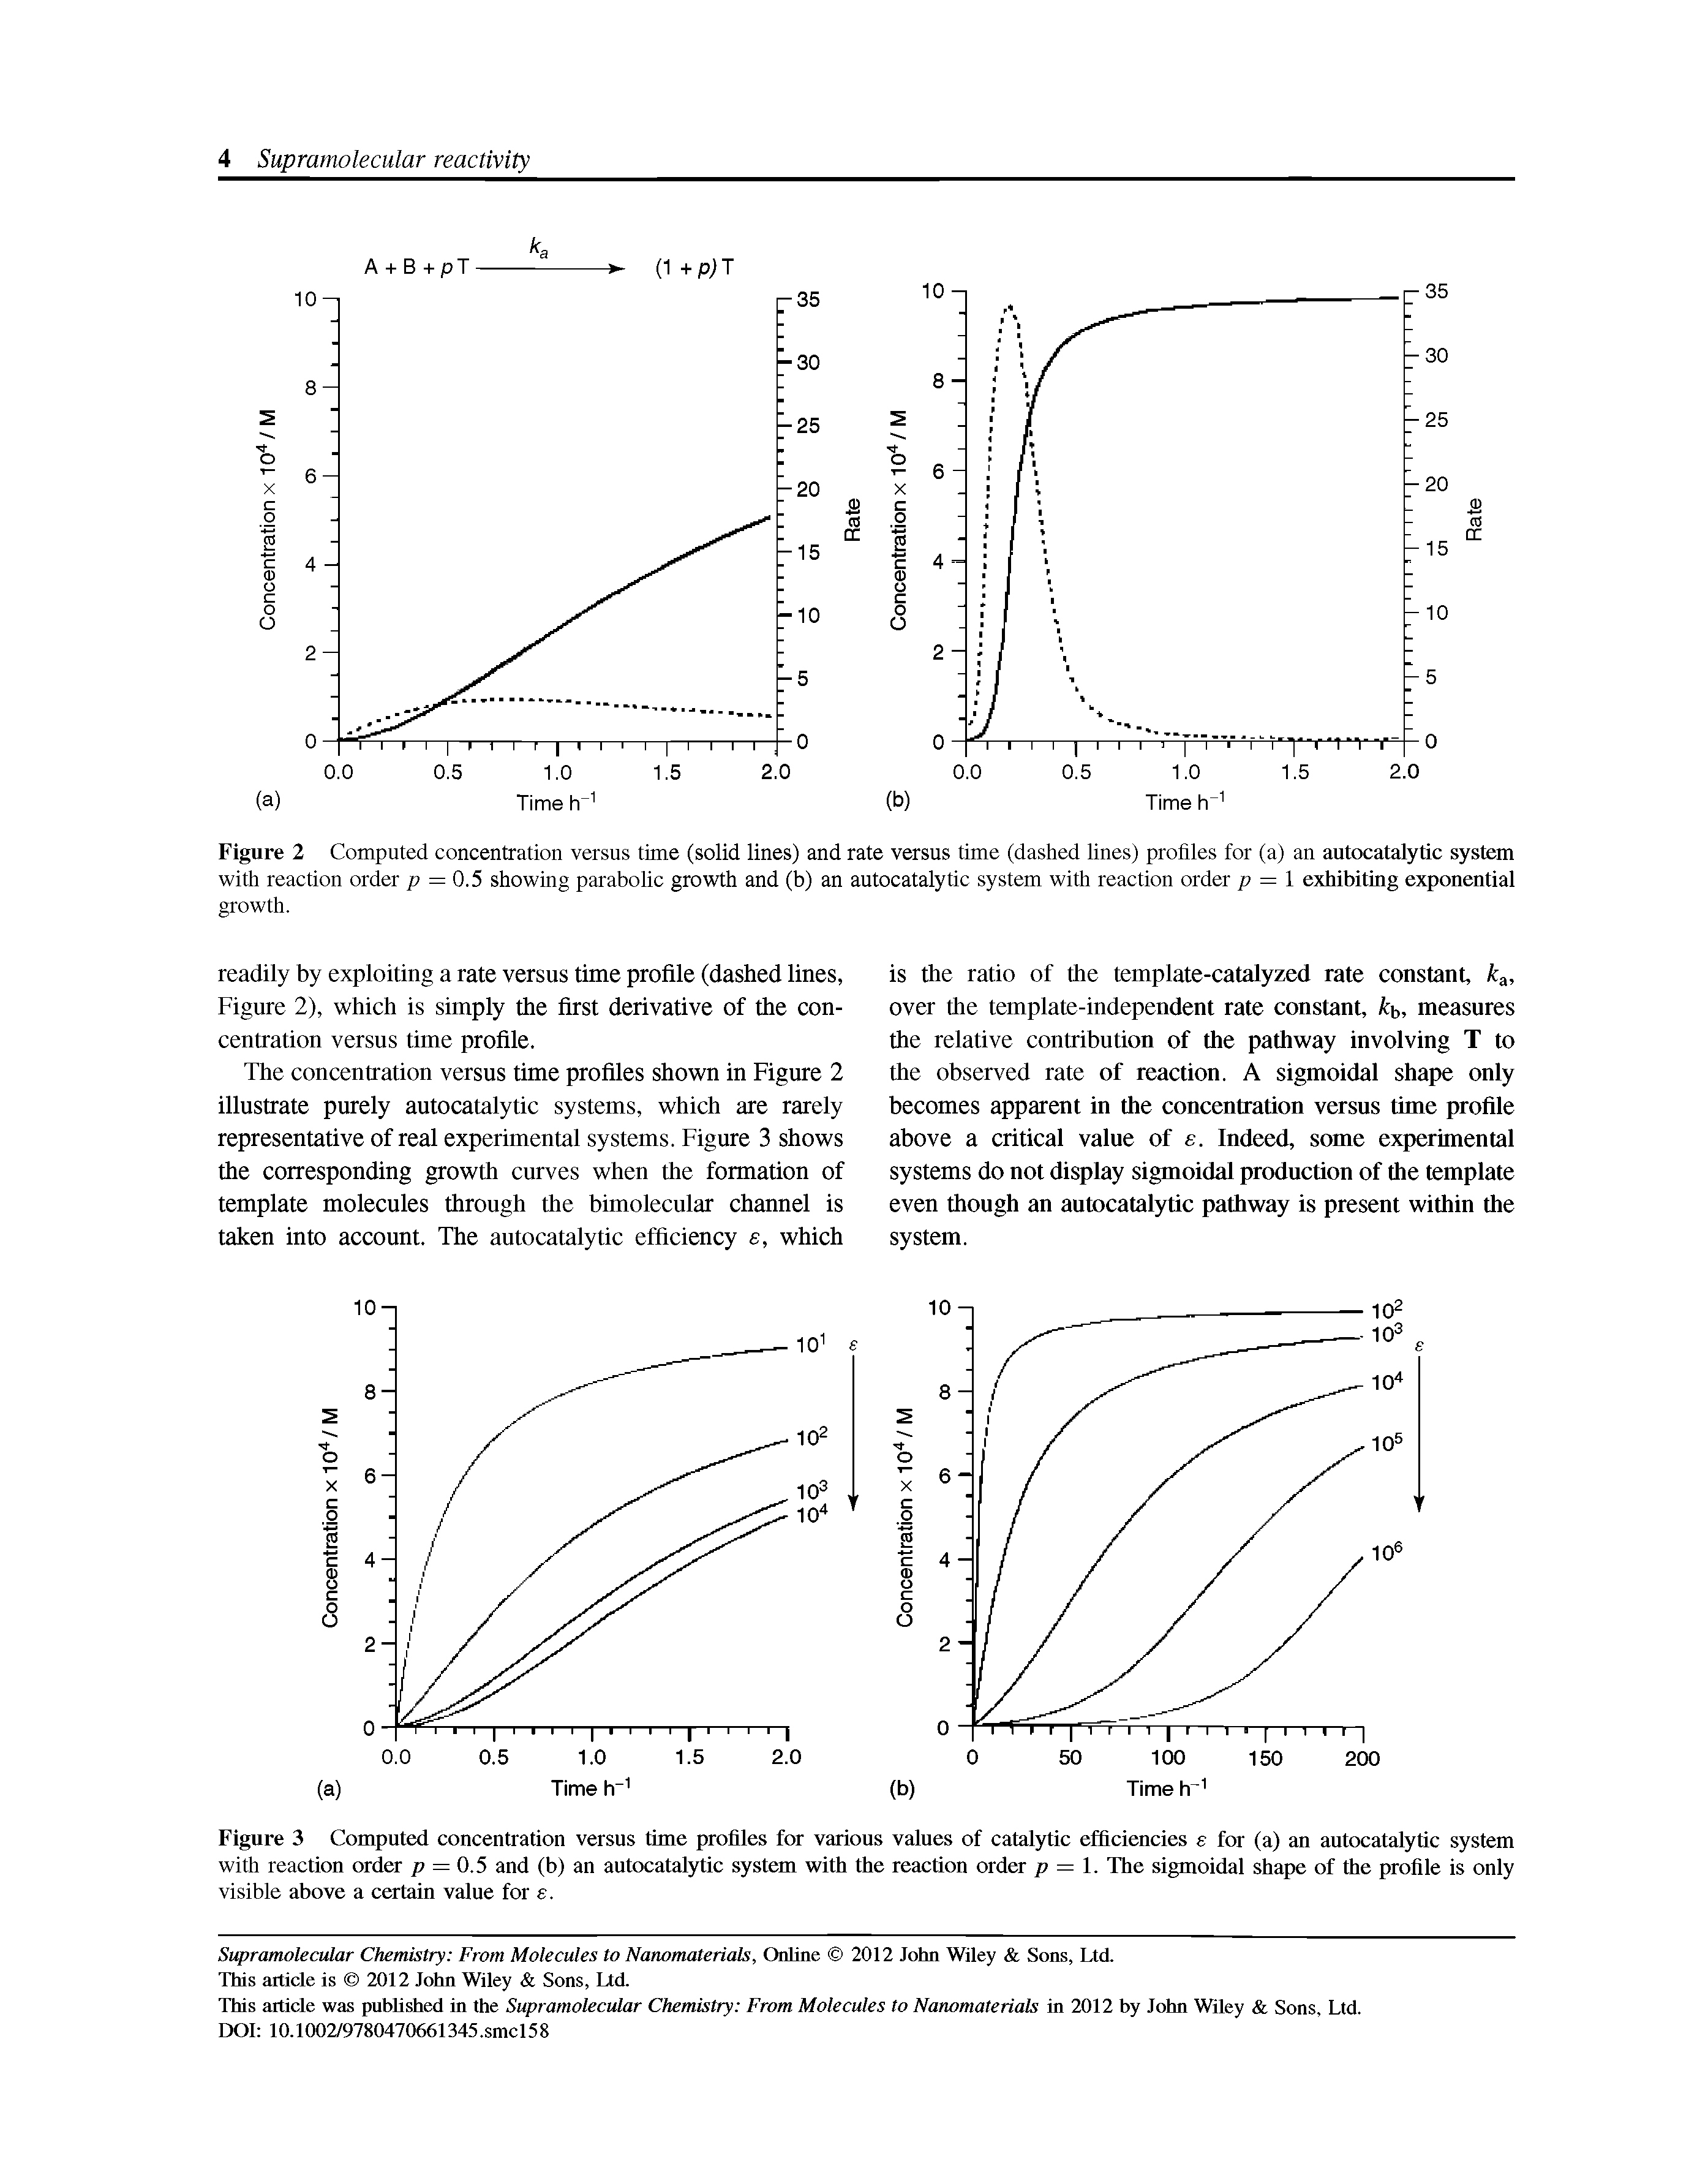 Figure 3 Computed concentration versus time profiles for various values of catalytic efficiencies e for (a) an autocatalytic system with reaction order p = 0.5 and (b) an autocatalytic system with the reaction order p = 1. The sigmoidal shape of the profile is only visible above a cerfain value for e.